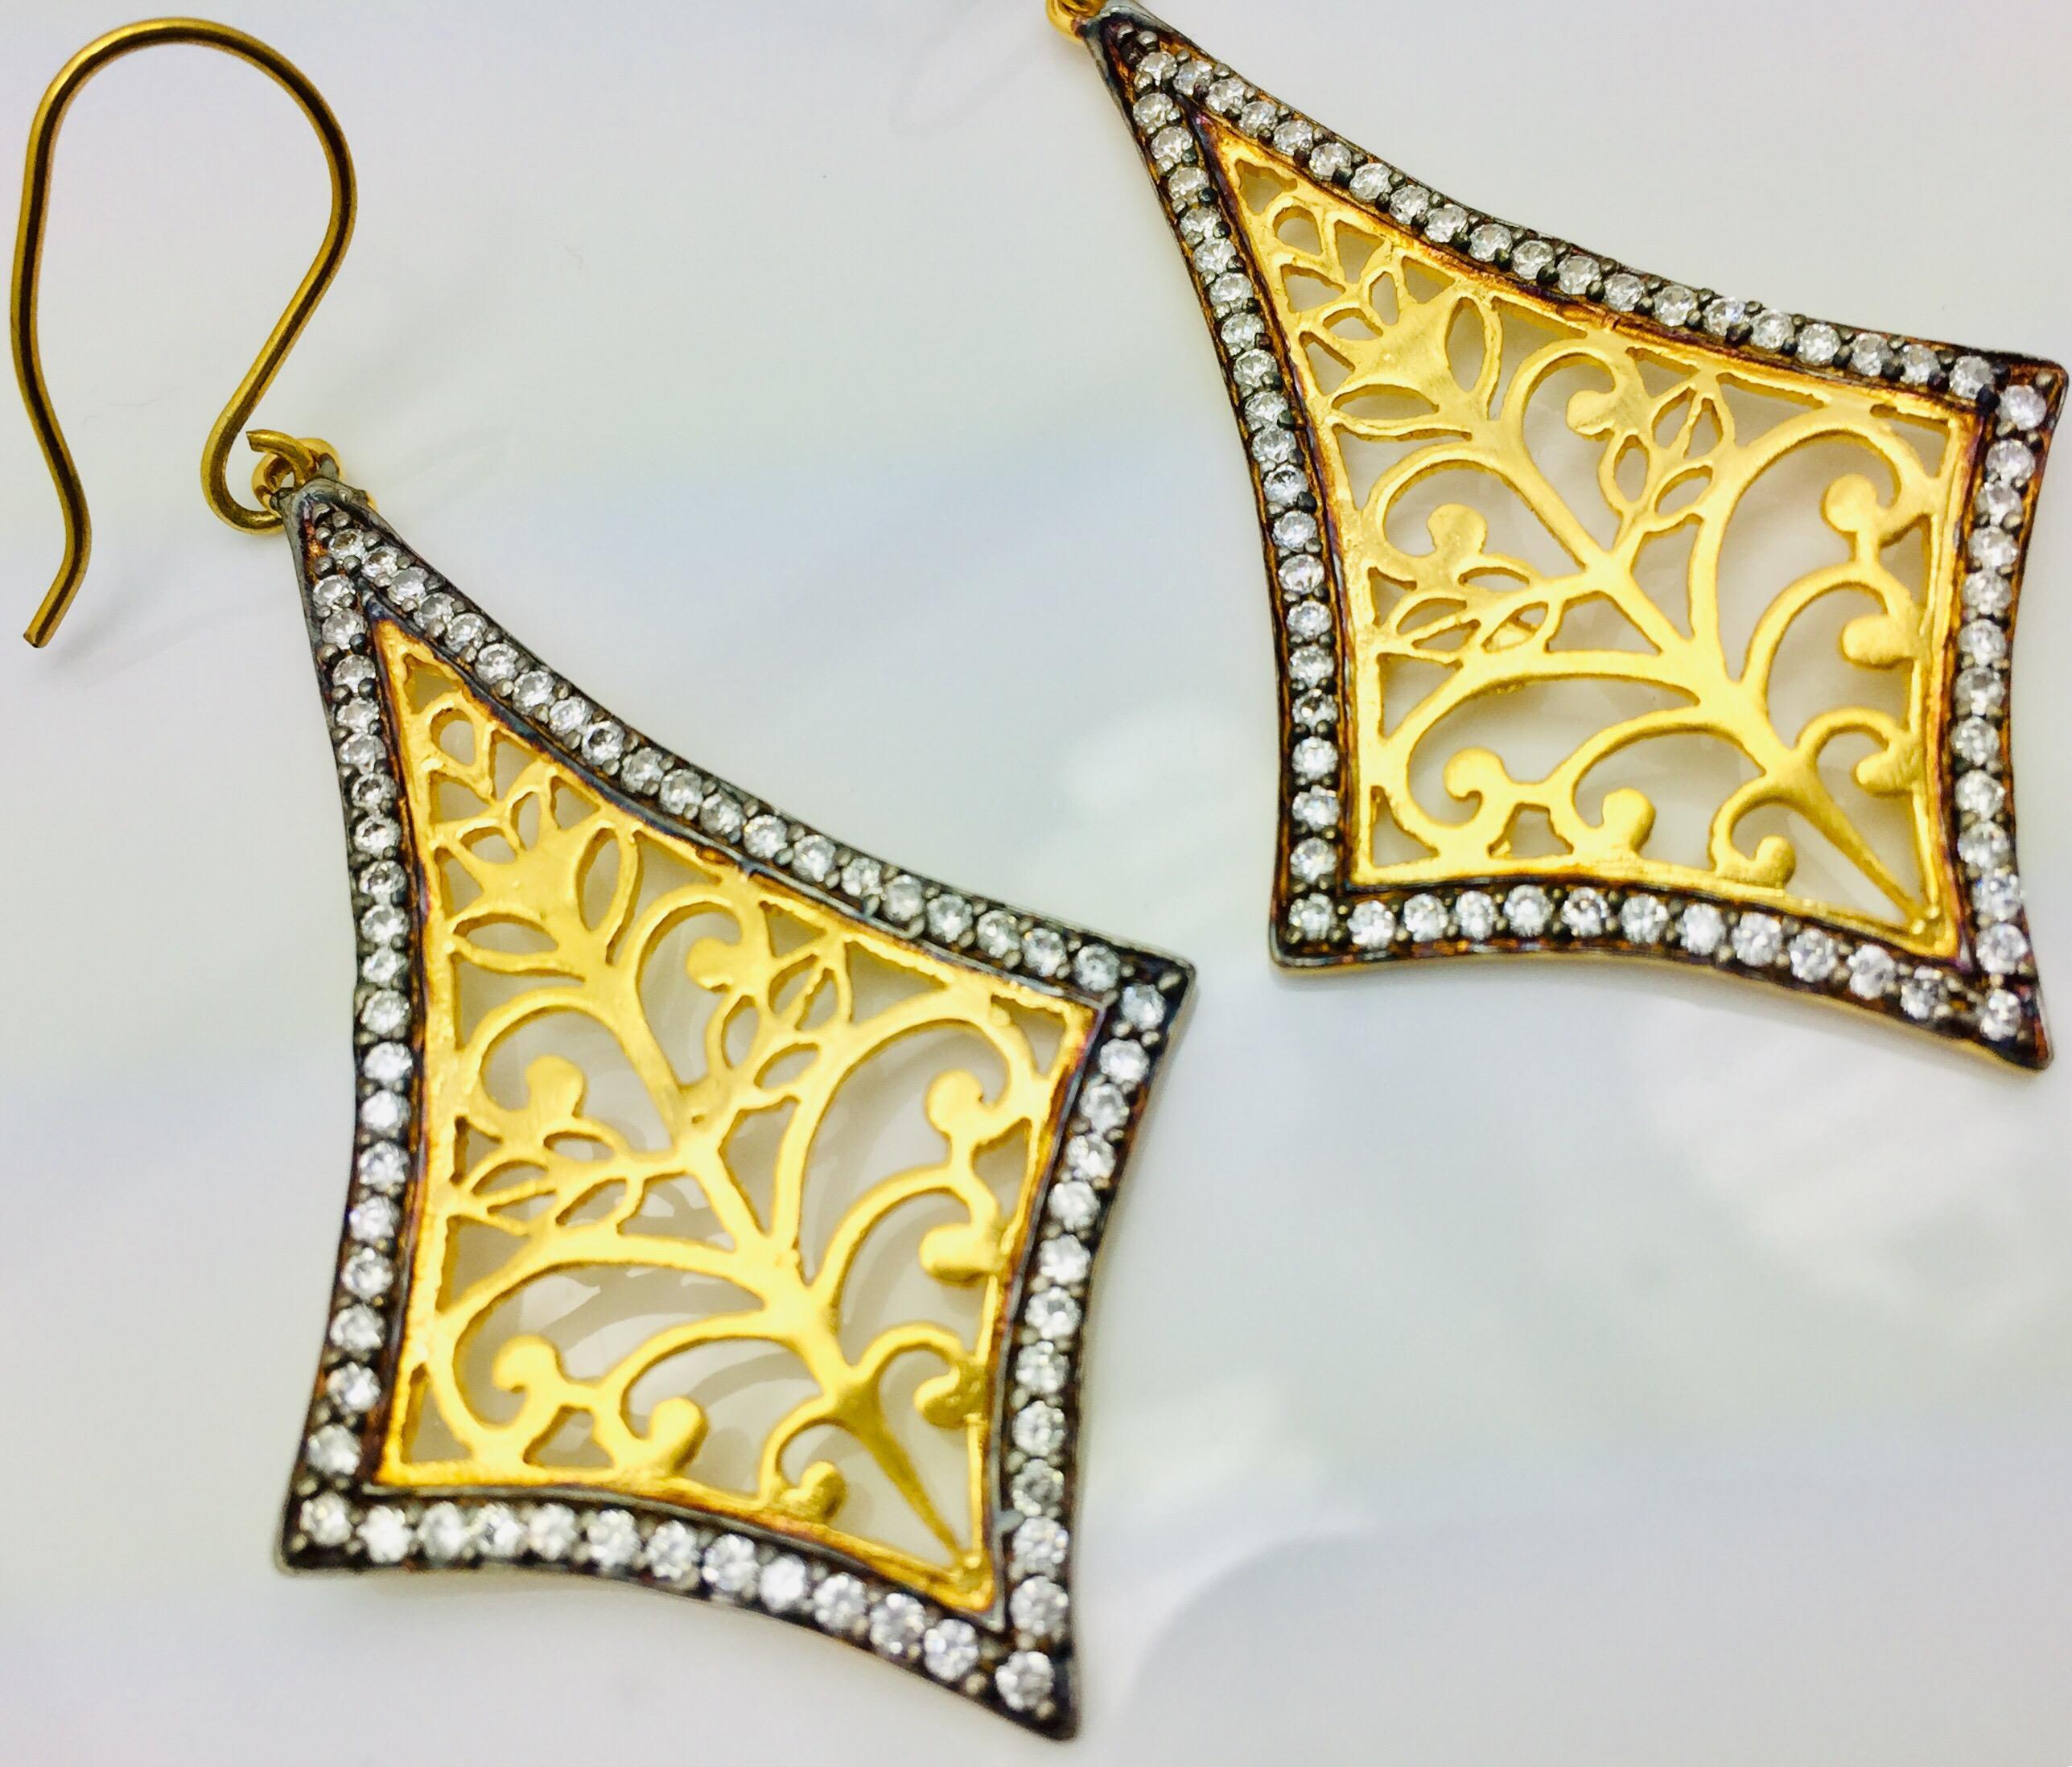 The handmade filigree earrings is ornate and lovely, it is enhanced by sparkling CZ stones. Earrings have a fish hook closure for pierced ears.  Only 1 available. Earrings are light weight.

Length: 2 inches
Width: 1 1/2 inches

FOLLOW  MEGHNA